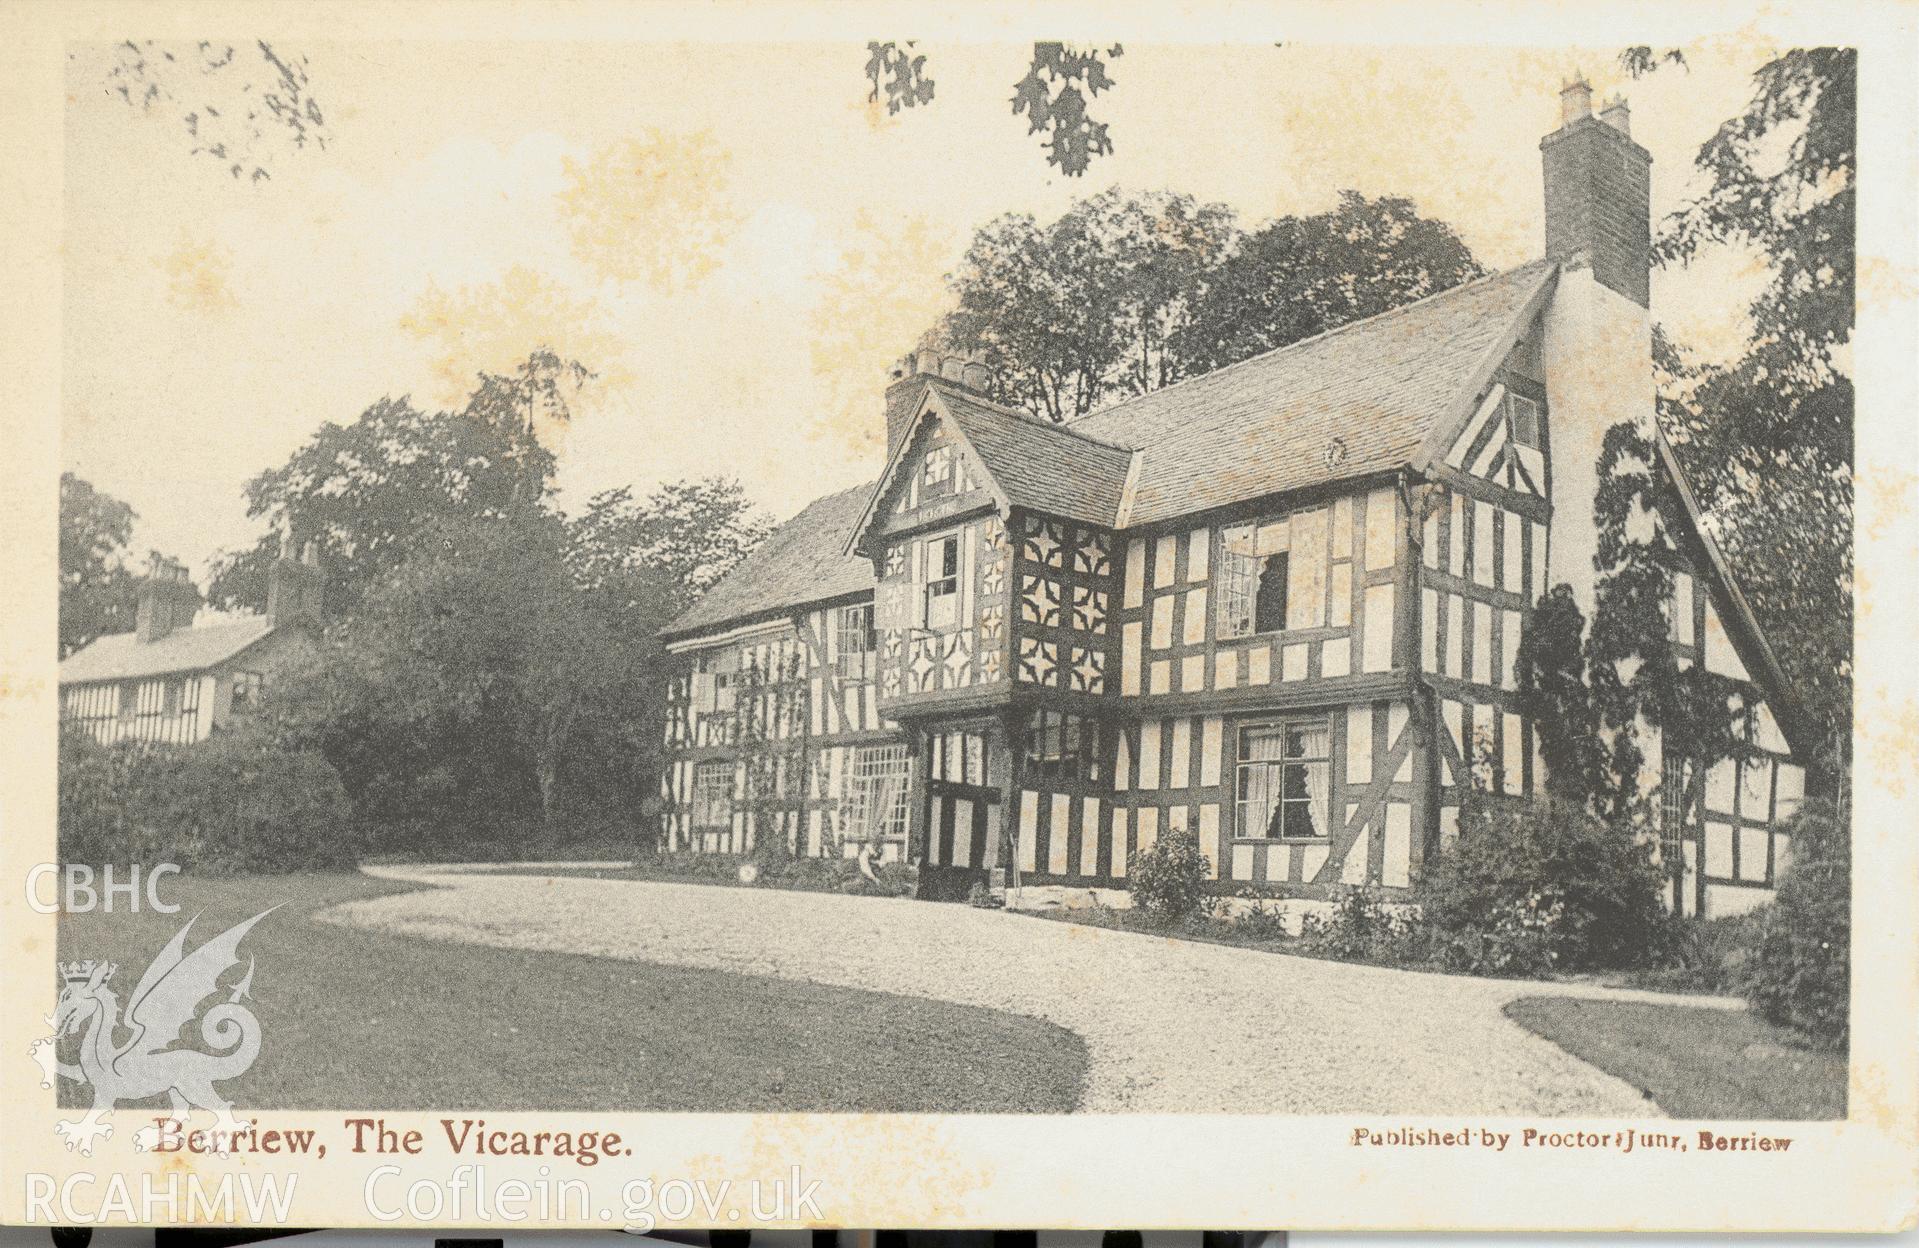 Digitised postcard image of the Old Vicarage, Berriew, Proctor Junr., Berriew. Produced by Parks and Gardens Data Services, from an original item in the Peter Davis Collection at Parks and Gardens UK. We hold only web-resolution images of this collection, suitable for viewing on screen and for research purposes only. We do not hold the original images, or publication quality scans.